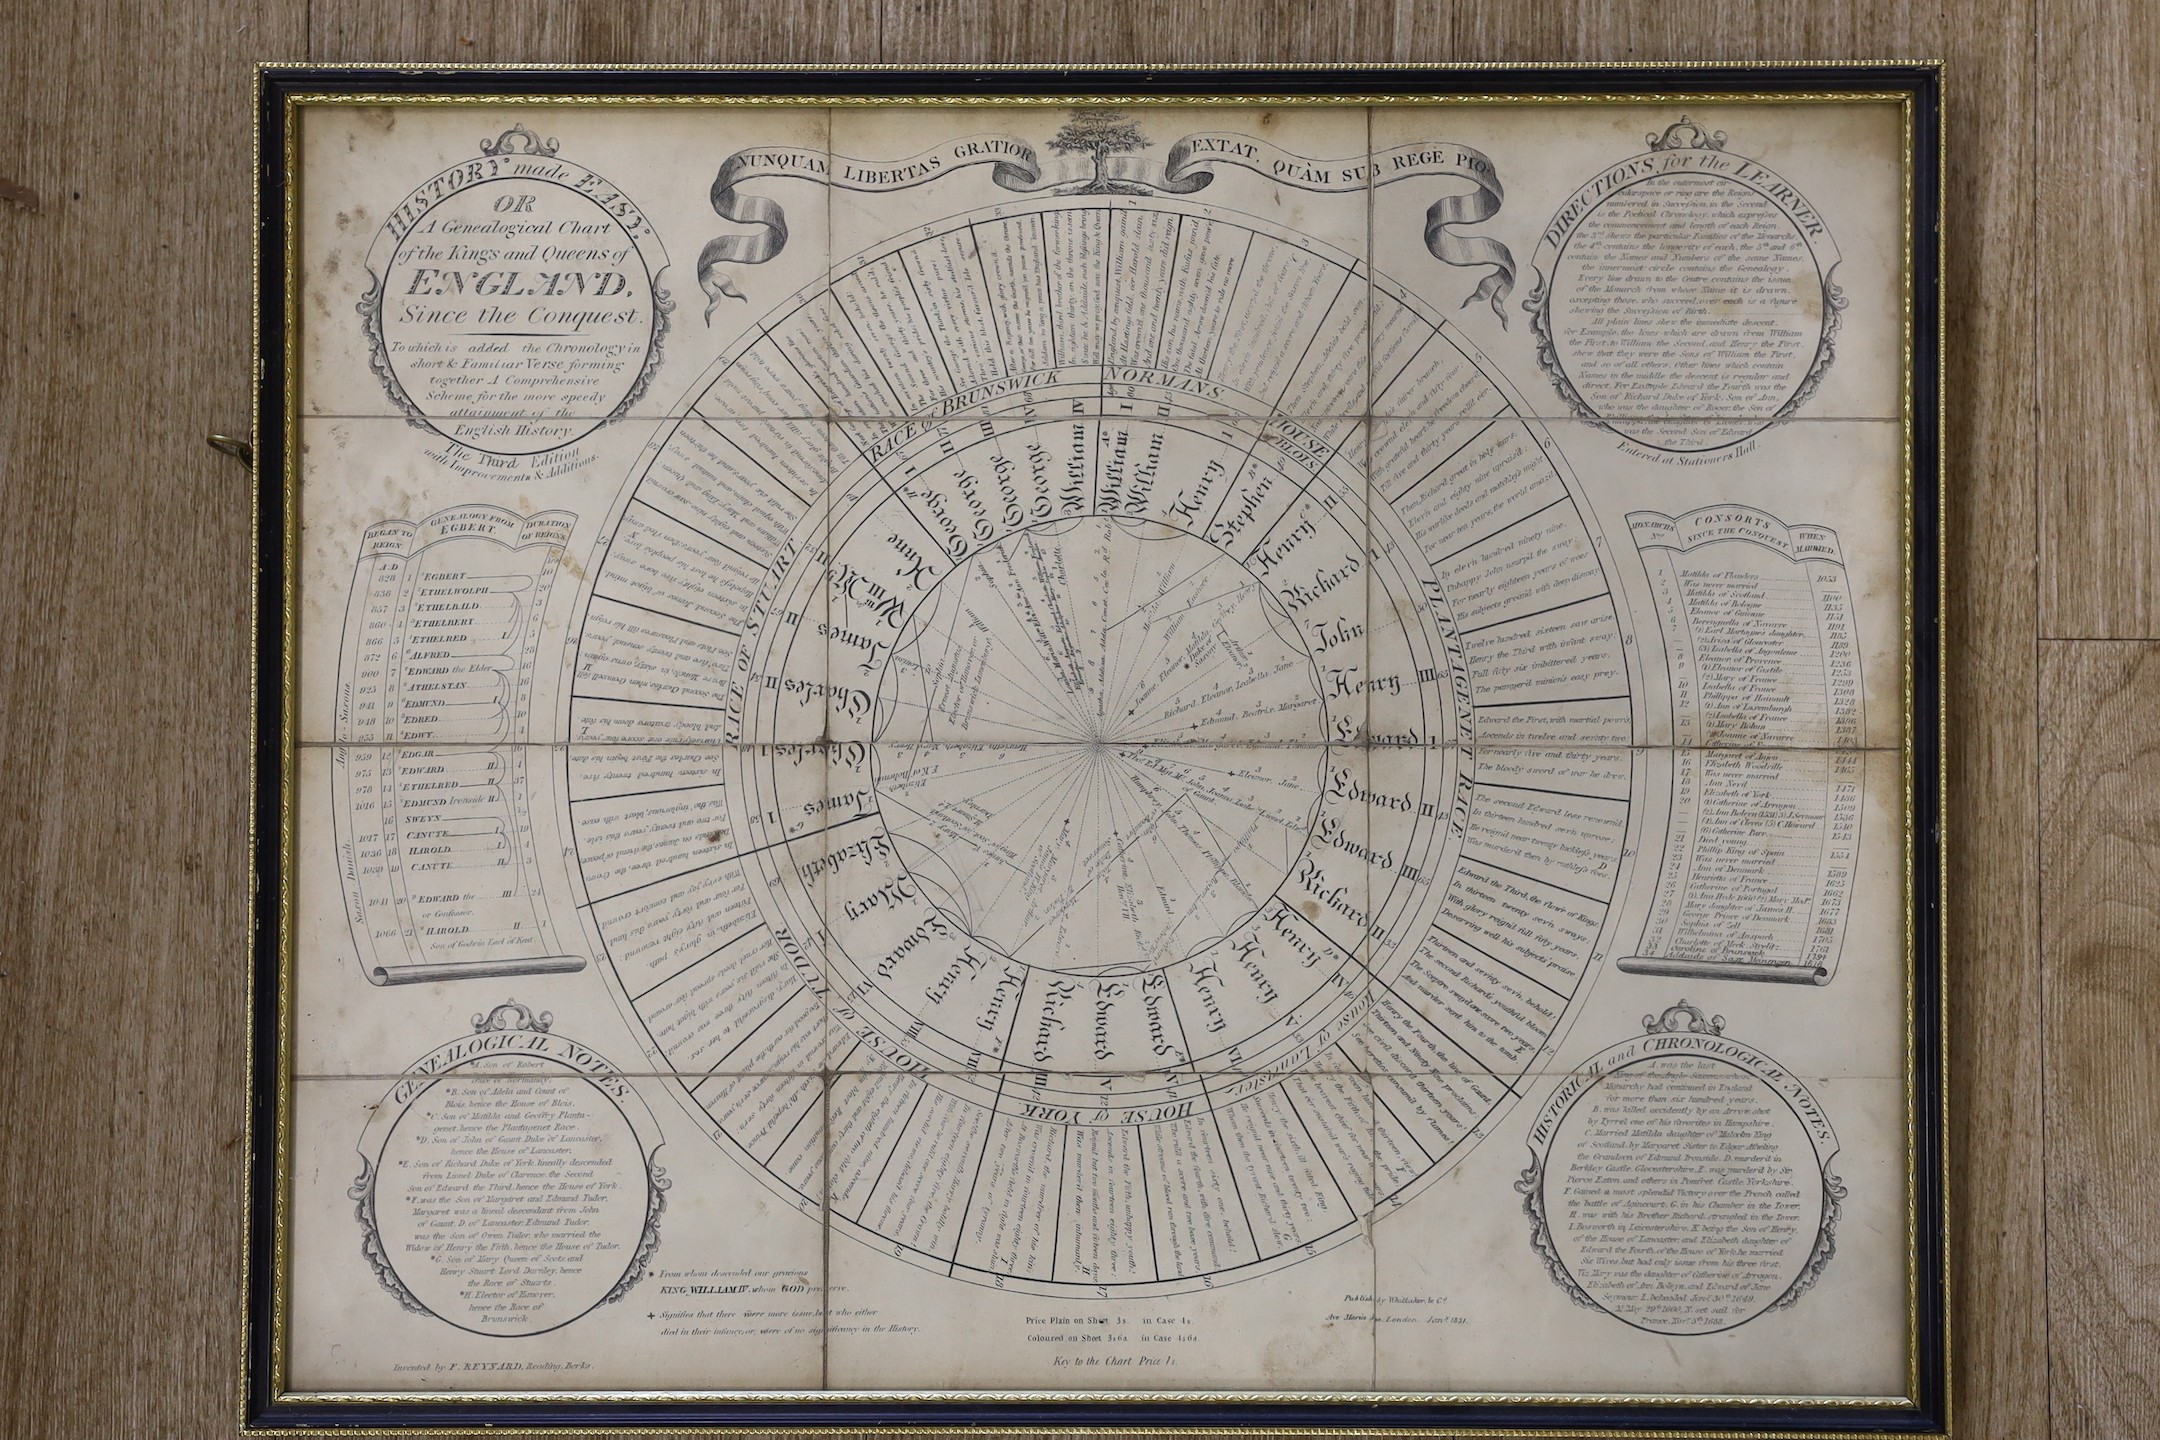 Francis Reynard, engraved circular educational table with surrounding circular and scroll-like text panels, History Made Easy or a Genealogical Chart of the Kings and Queens of England, publ. by Whittaker & Co. 1831, sec